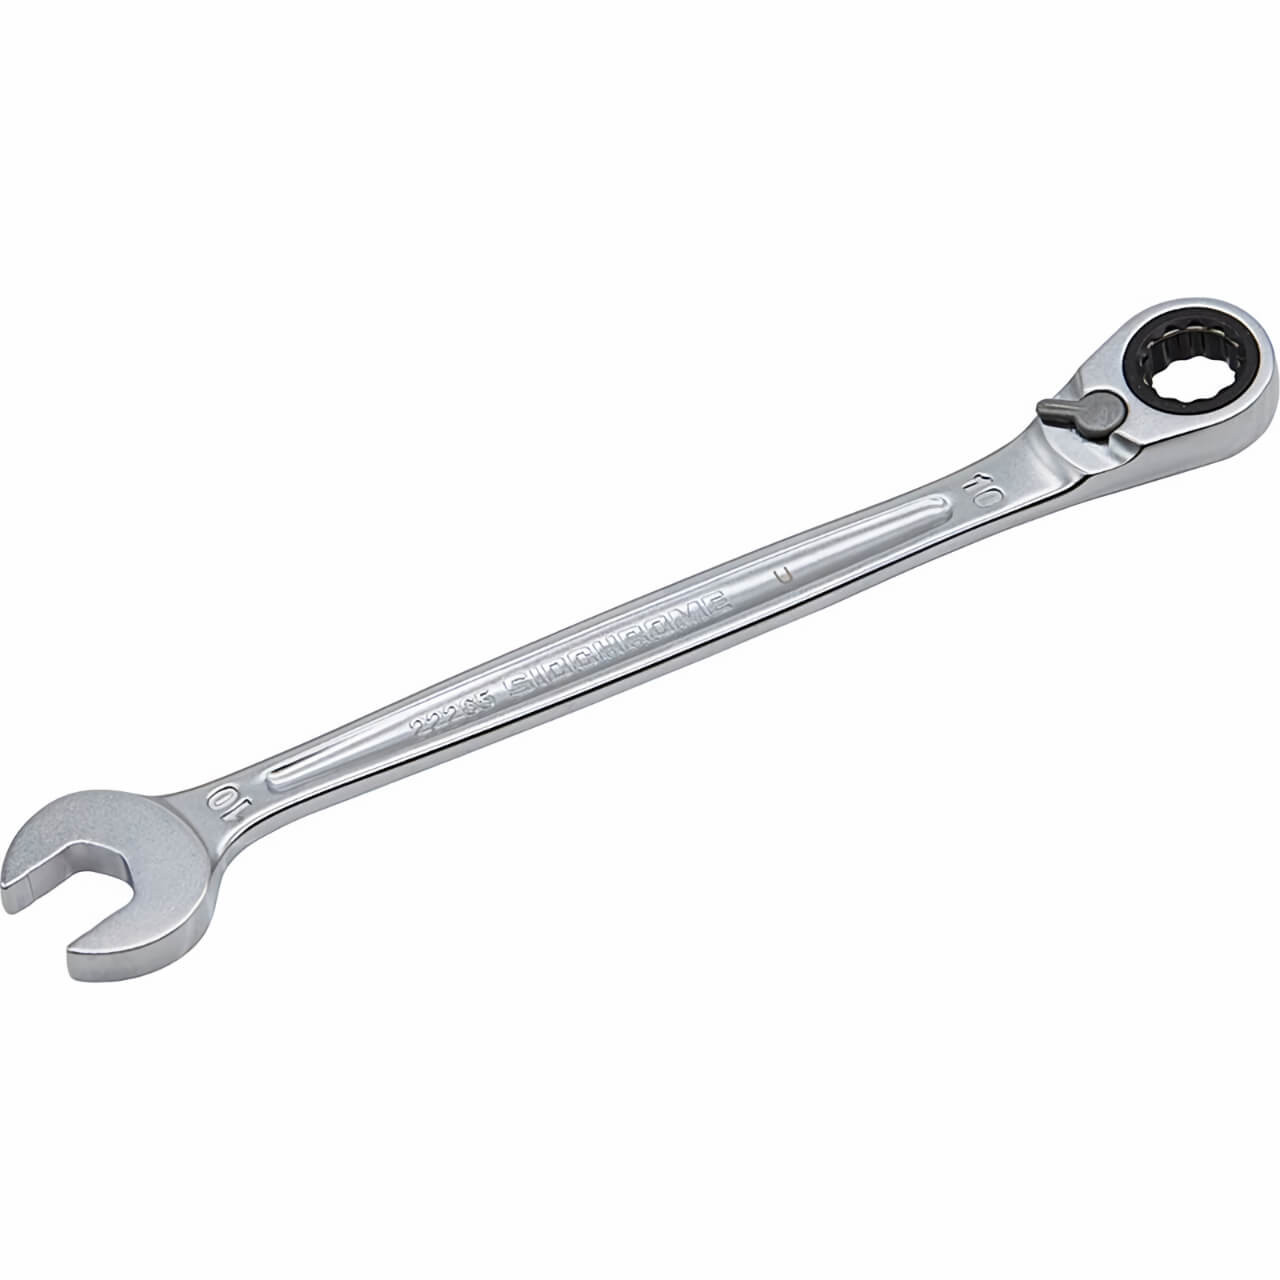 Sidchrome 8mm 467 Pro Series Reversible Combination Geared Spanner Metric